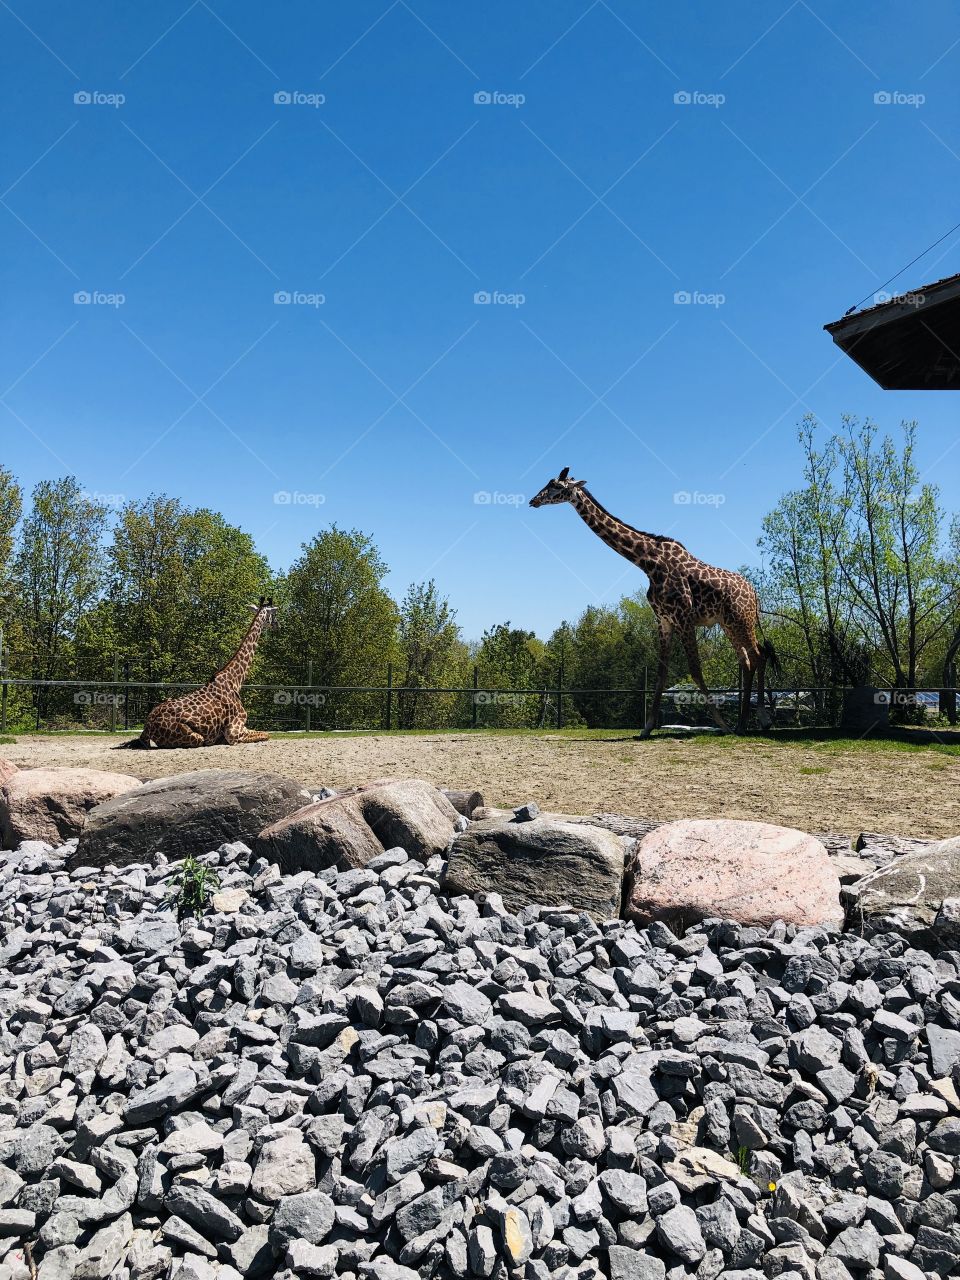 A pair of giraffes at play in their enclosure at the Toronto Zoo